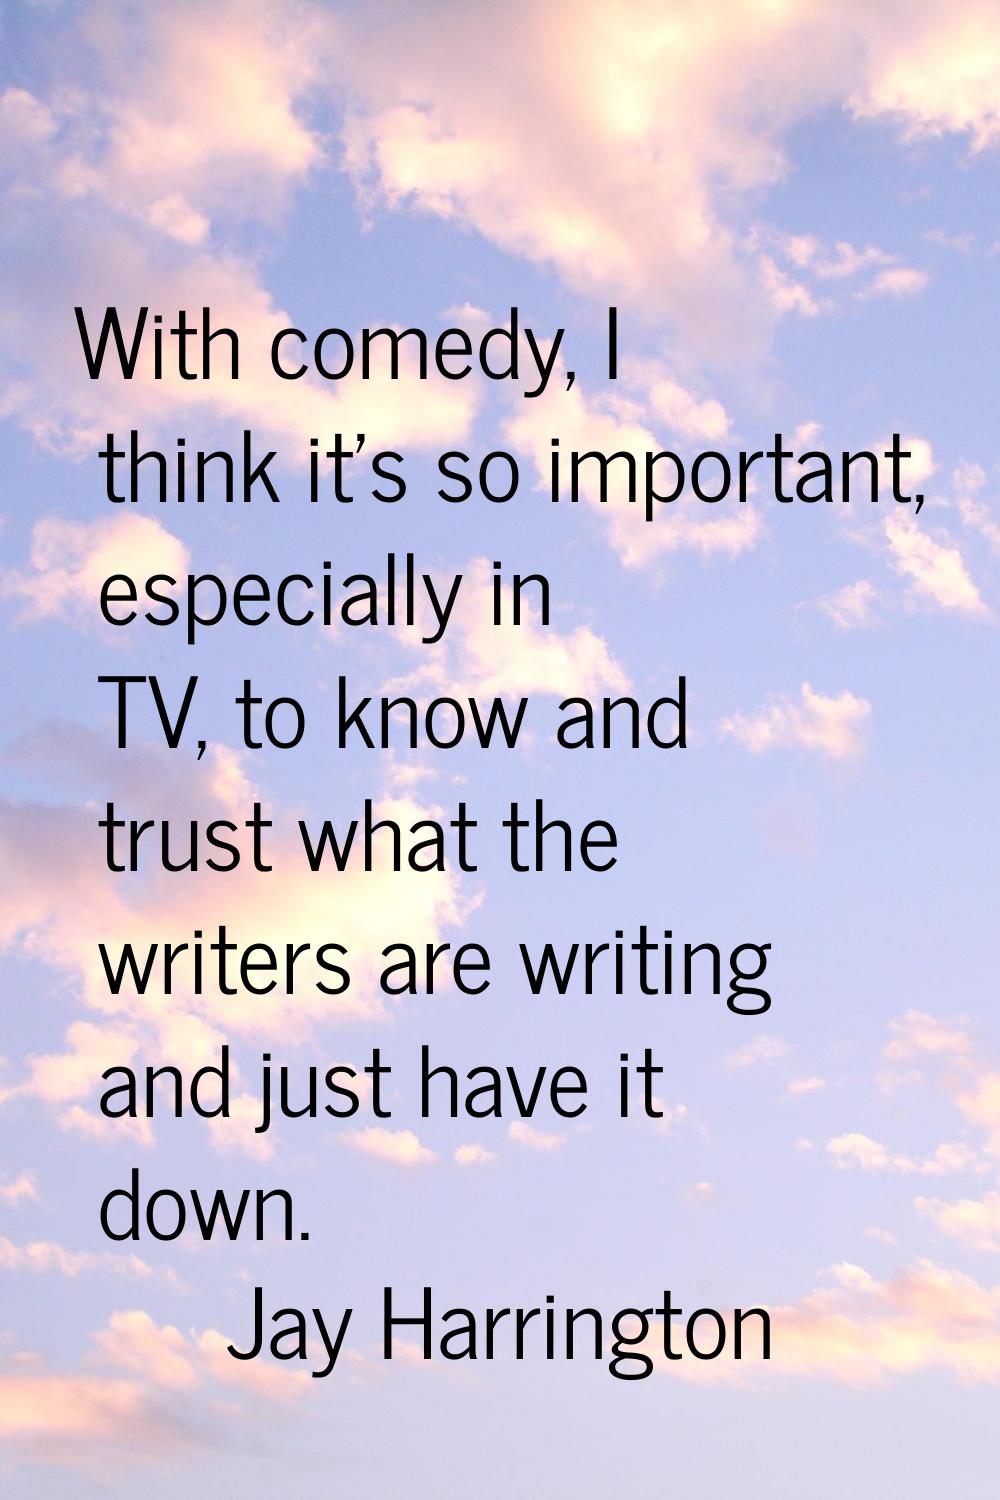 With comedy, I think it's so important, especially in TV, to know and trust what the writers are wr